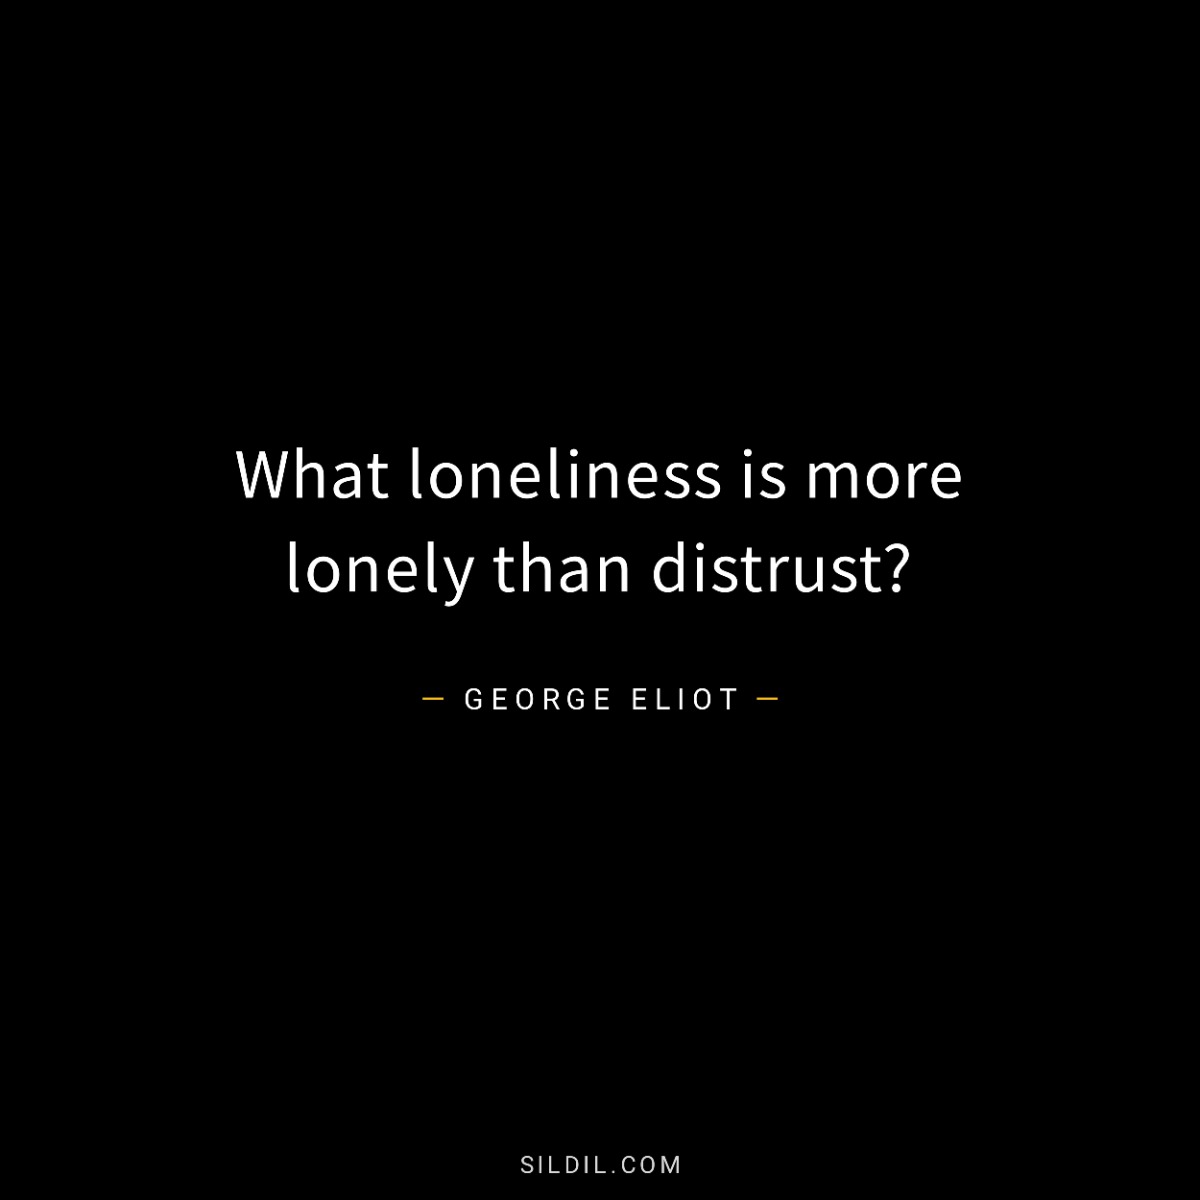 What loneliness is more lonely than distrust?